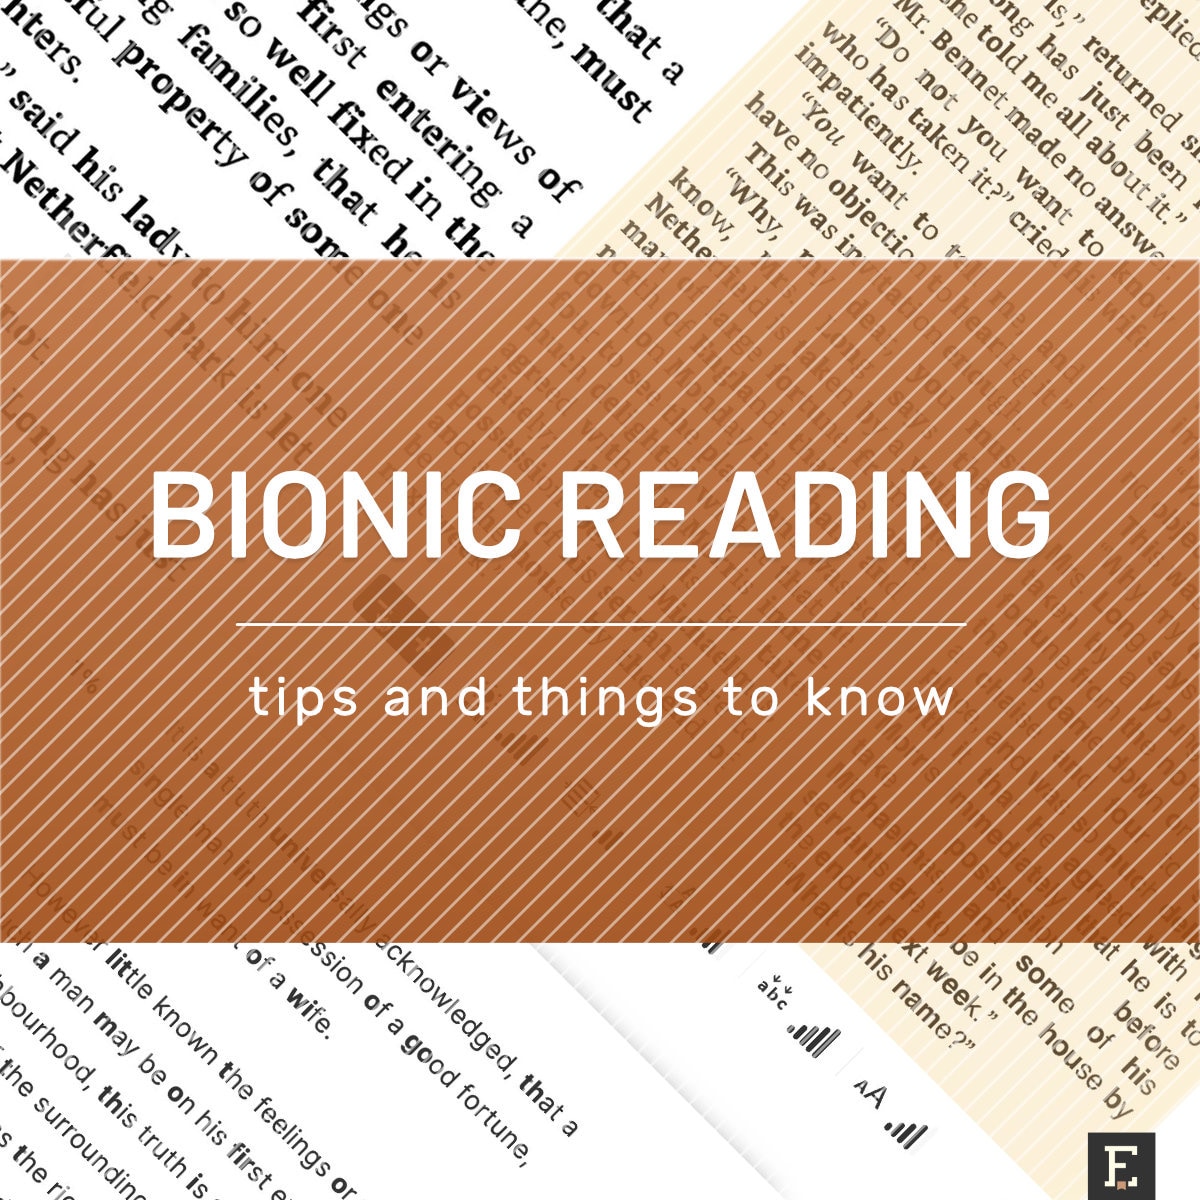 Bionic reading – everything you need to know